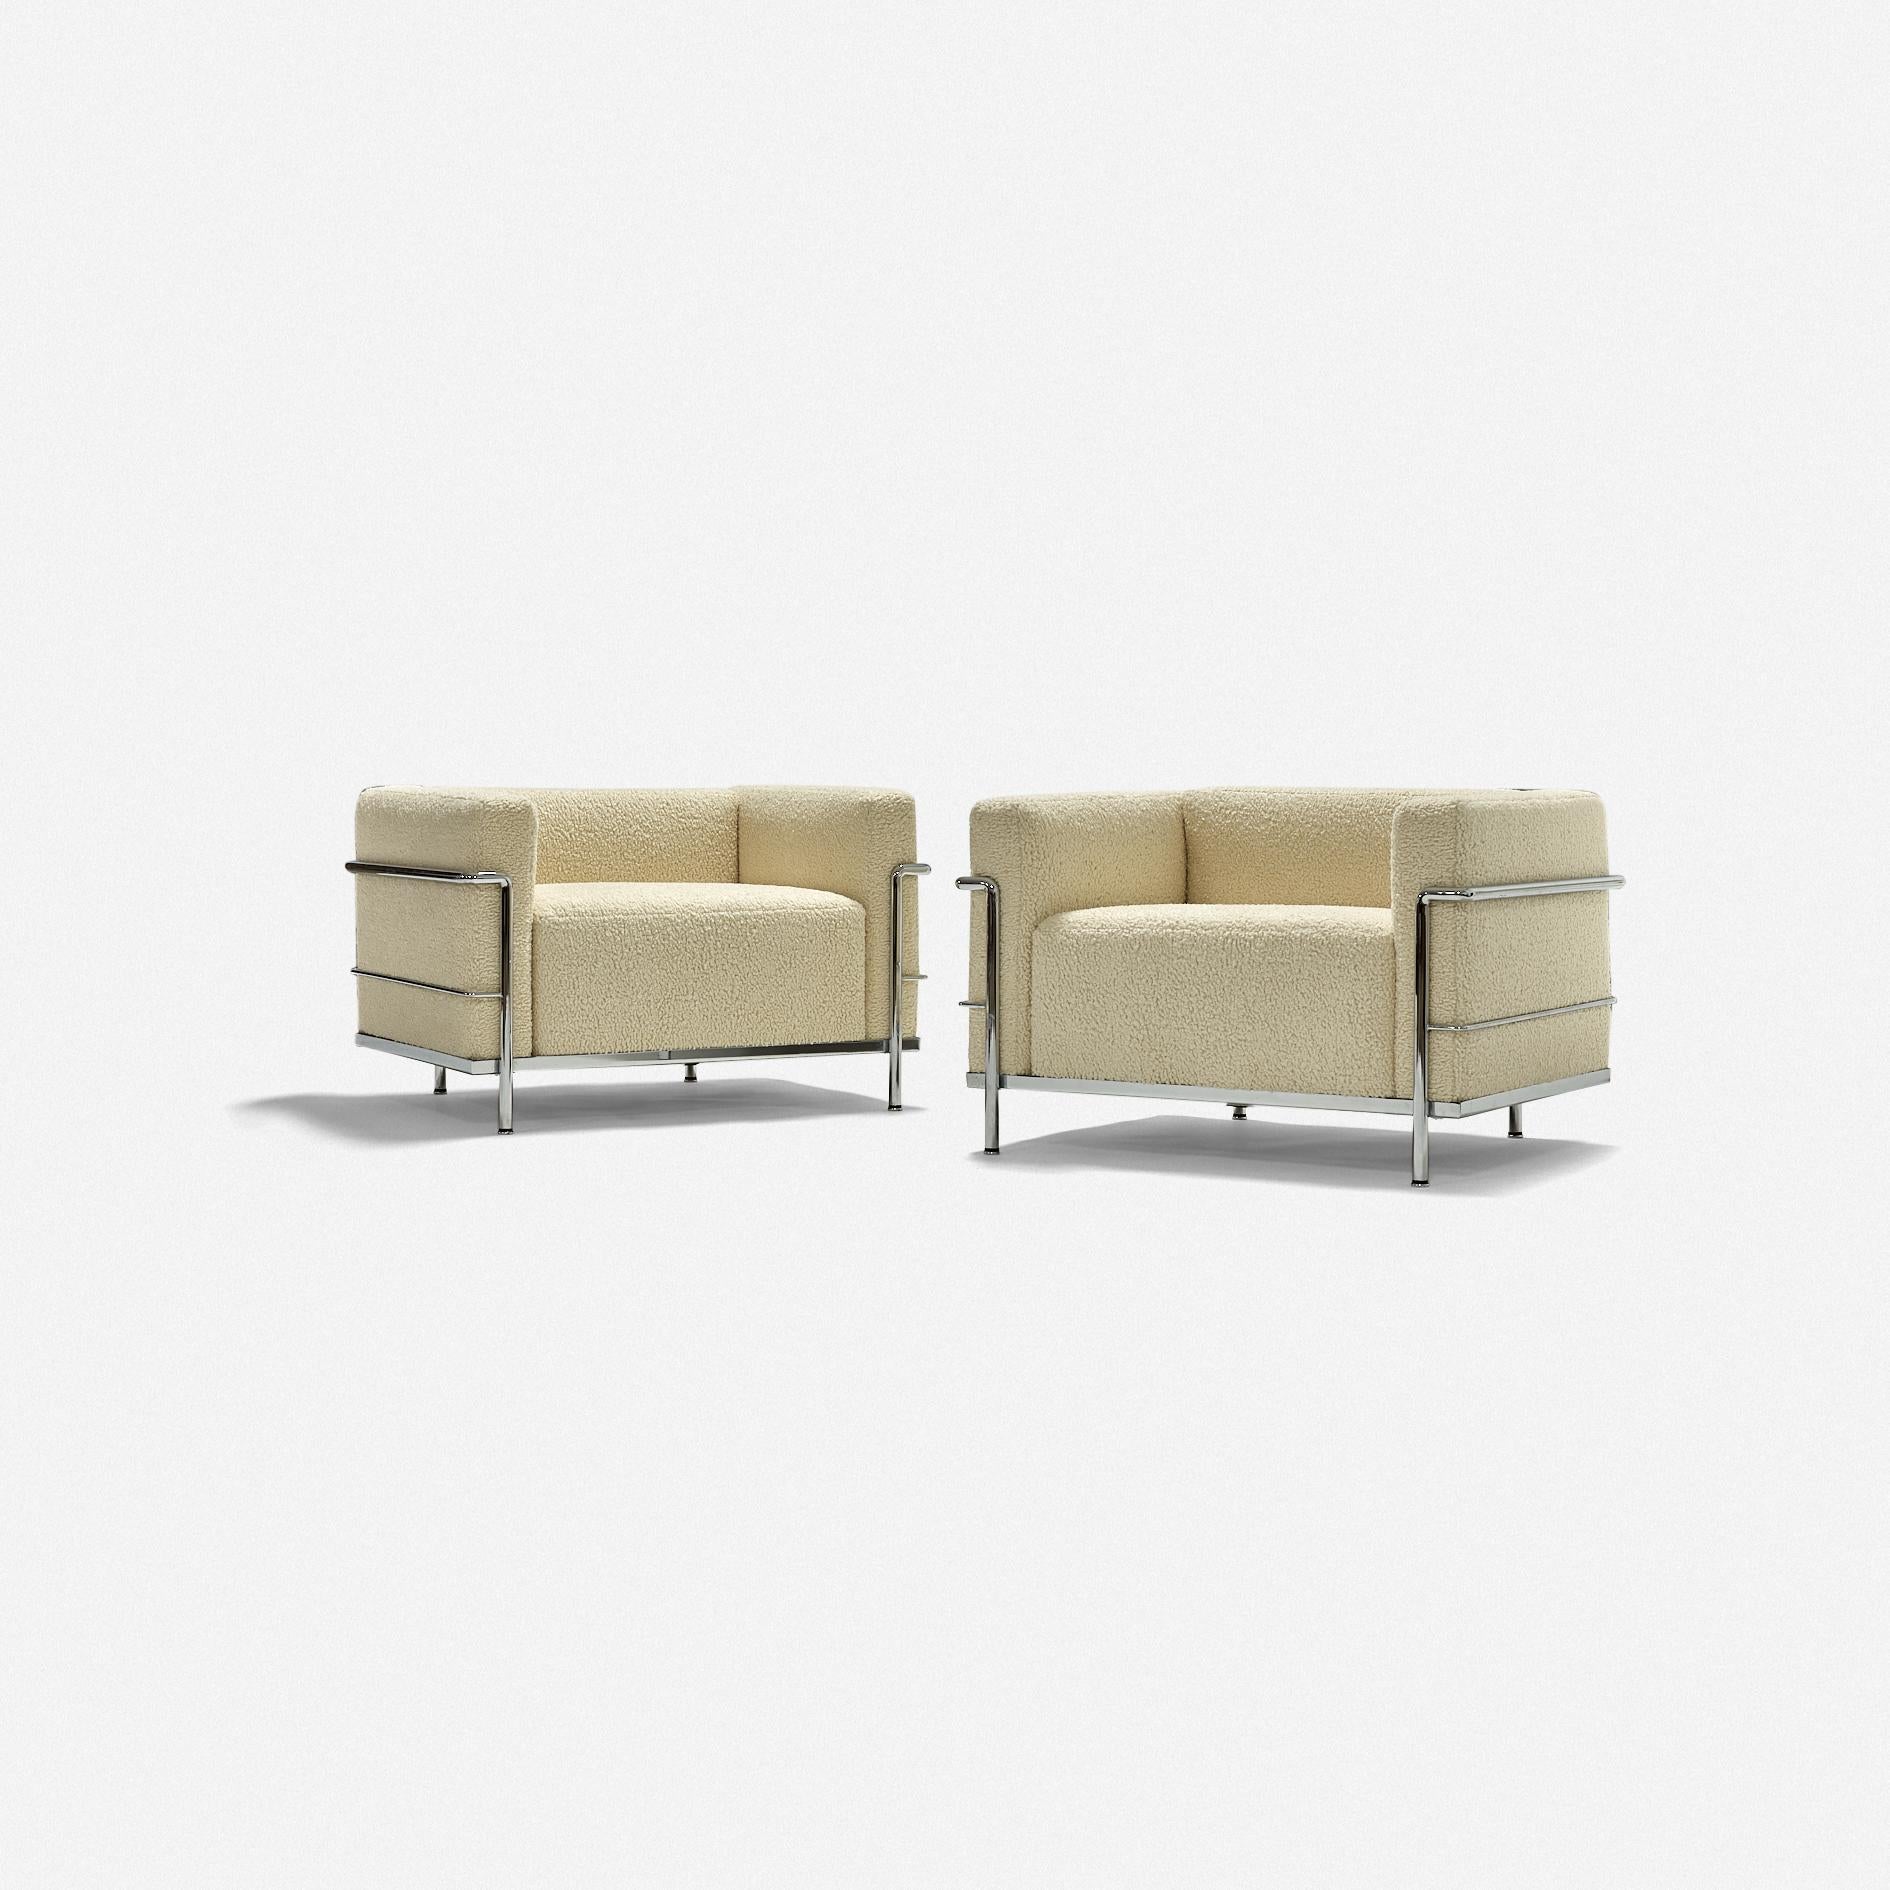 Italian Cassina Le Corbusier, Pierre Jeanneret, Charlotte Perriand LC3 Lounge Chairs